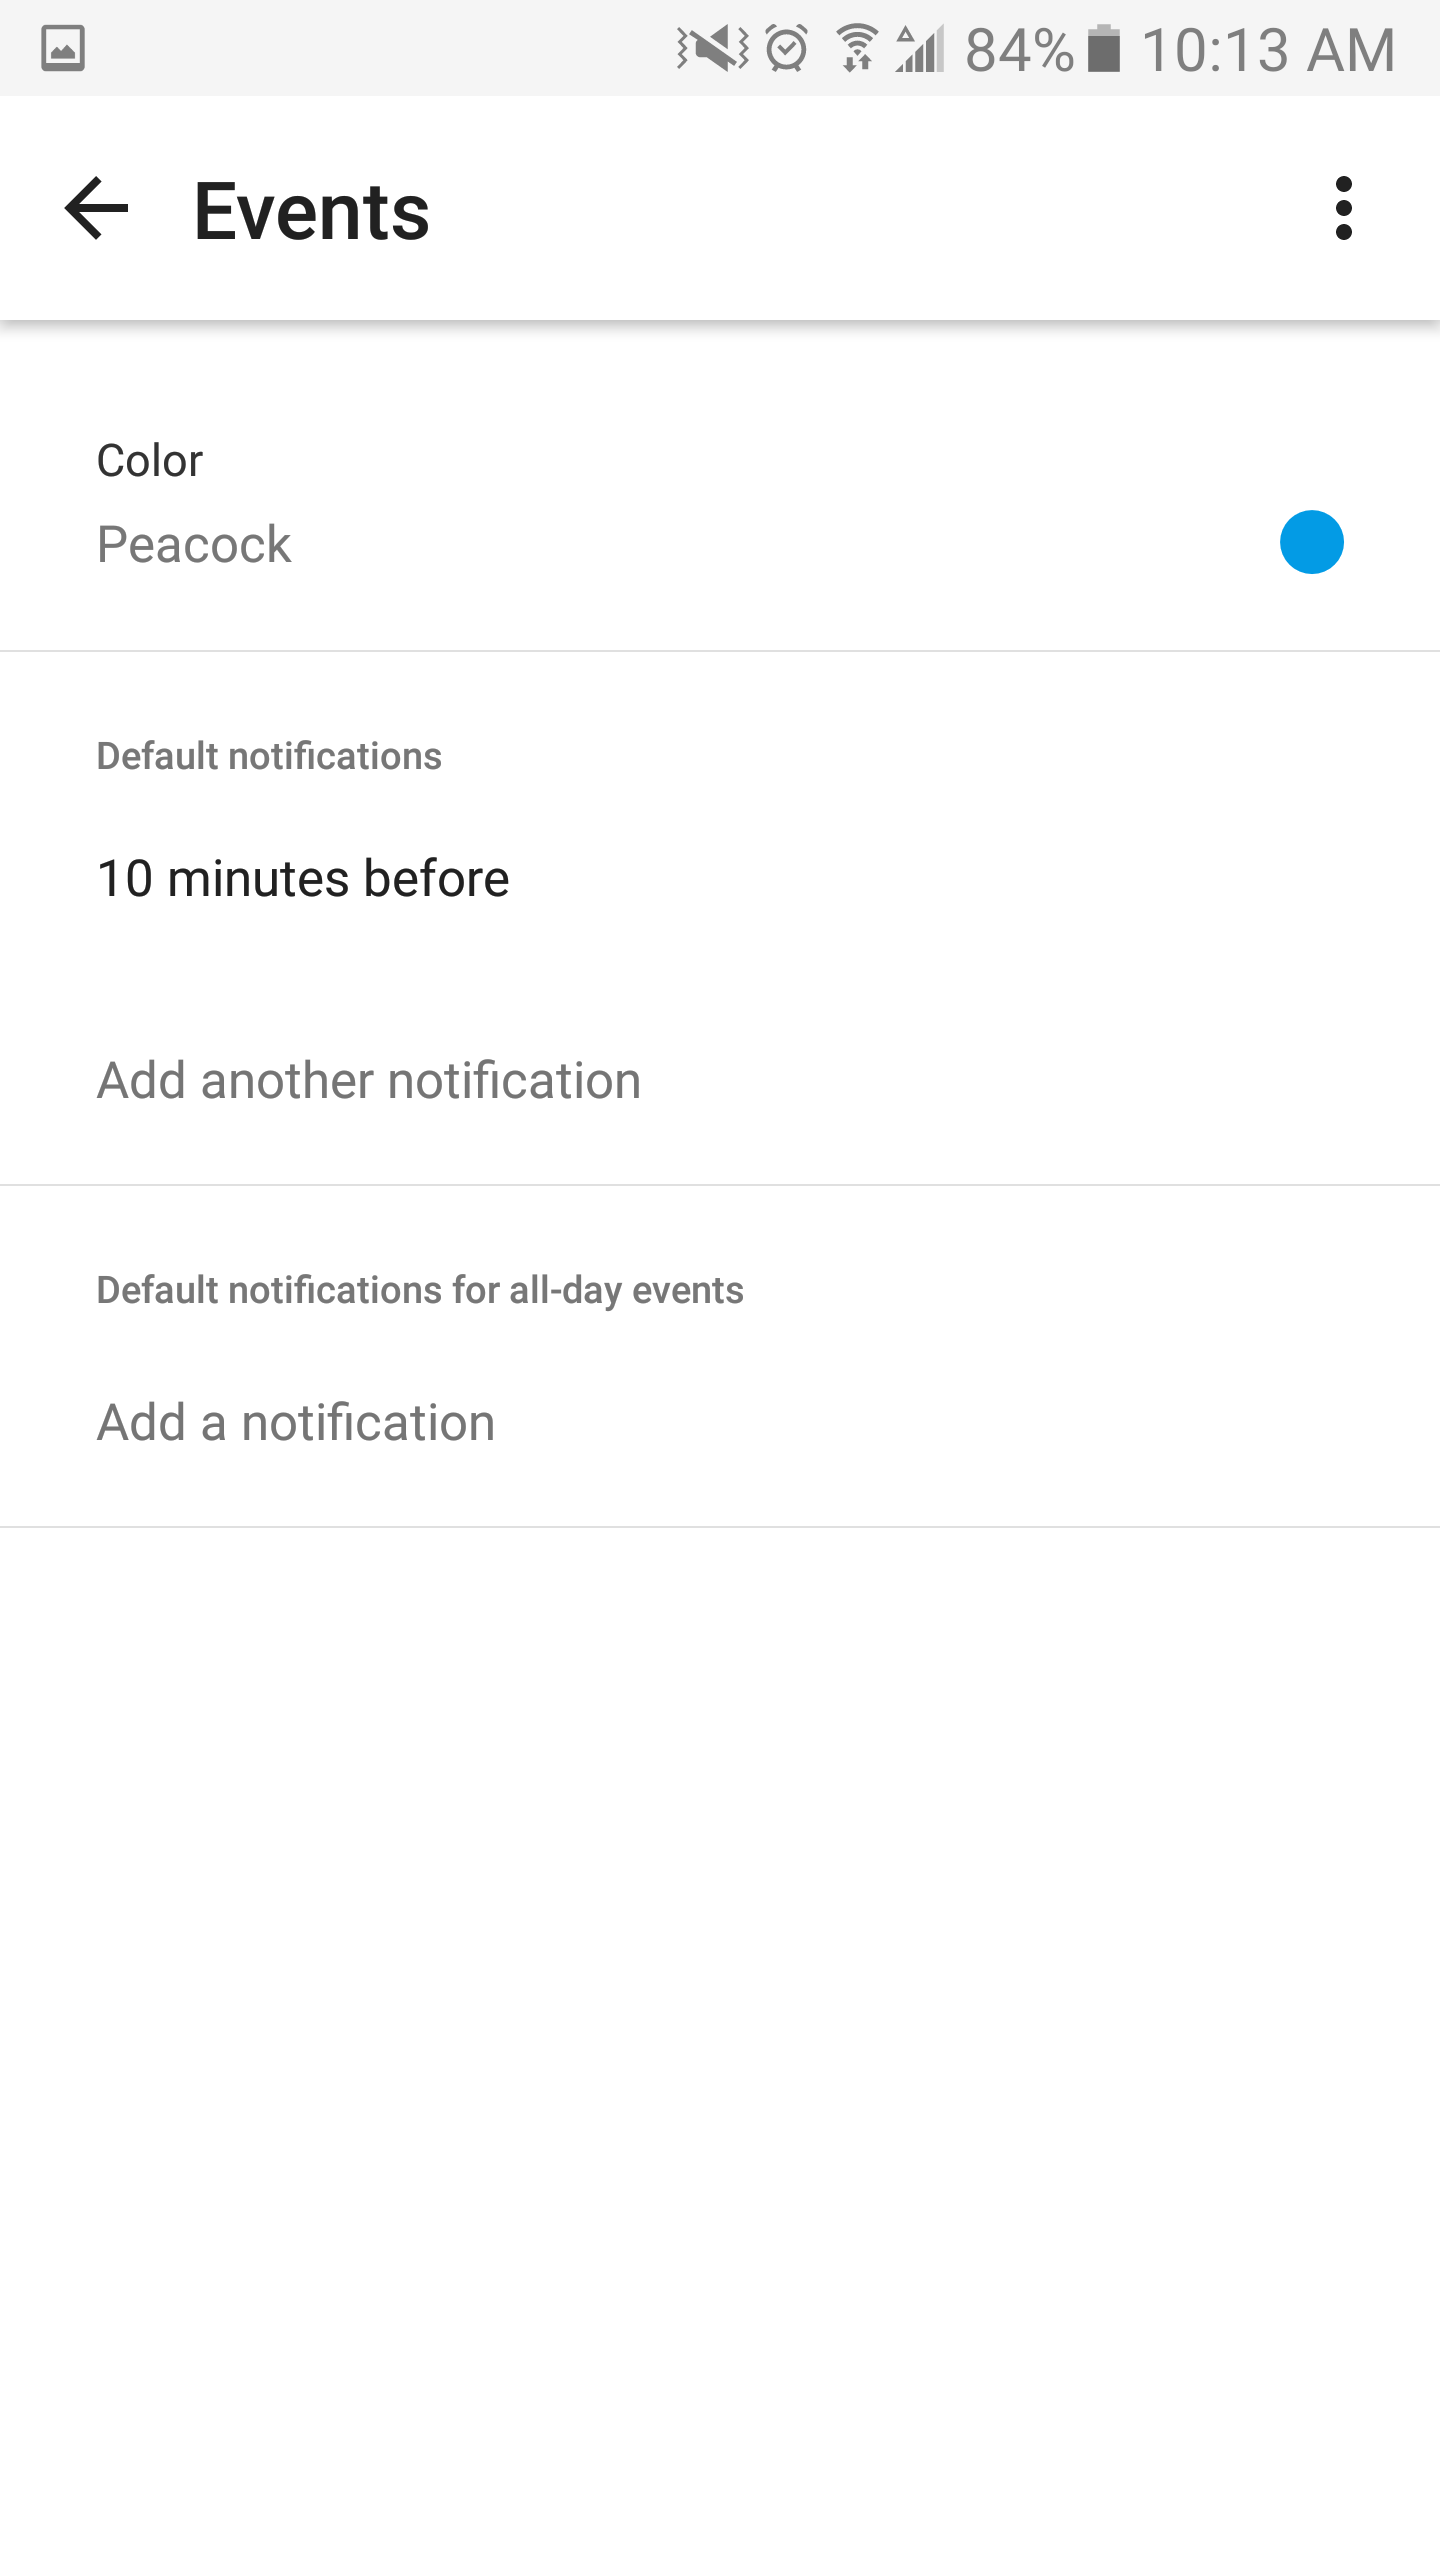 Android calendar app settings, events display